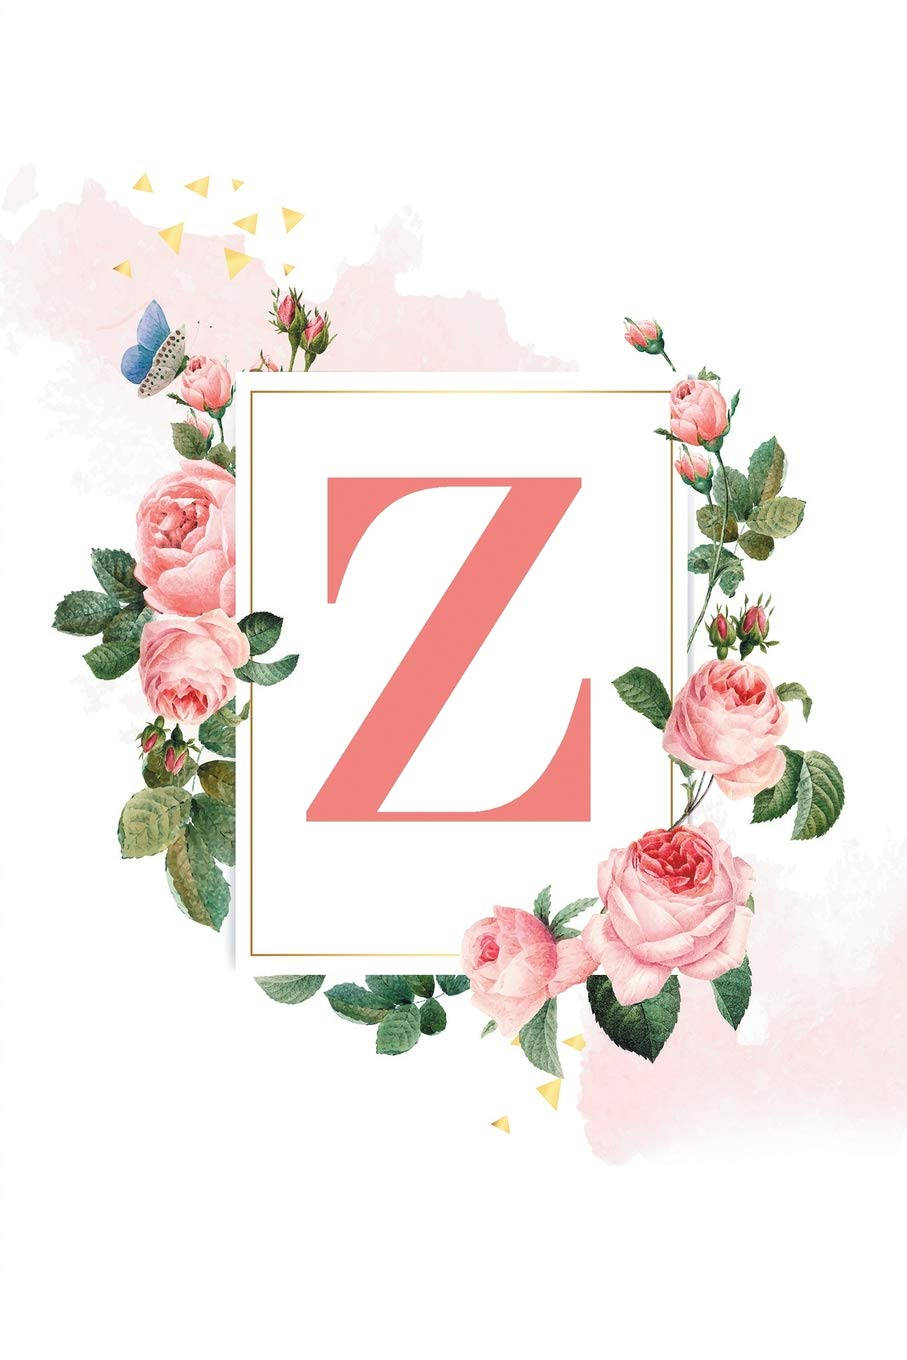 Elegance In Lettering: The Letter Z Adorned With Vibrant Pink Flowers